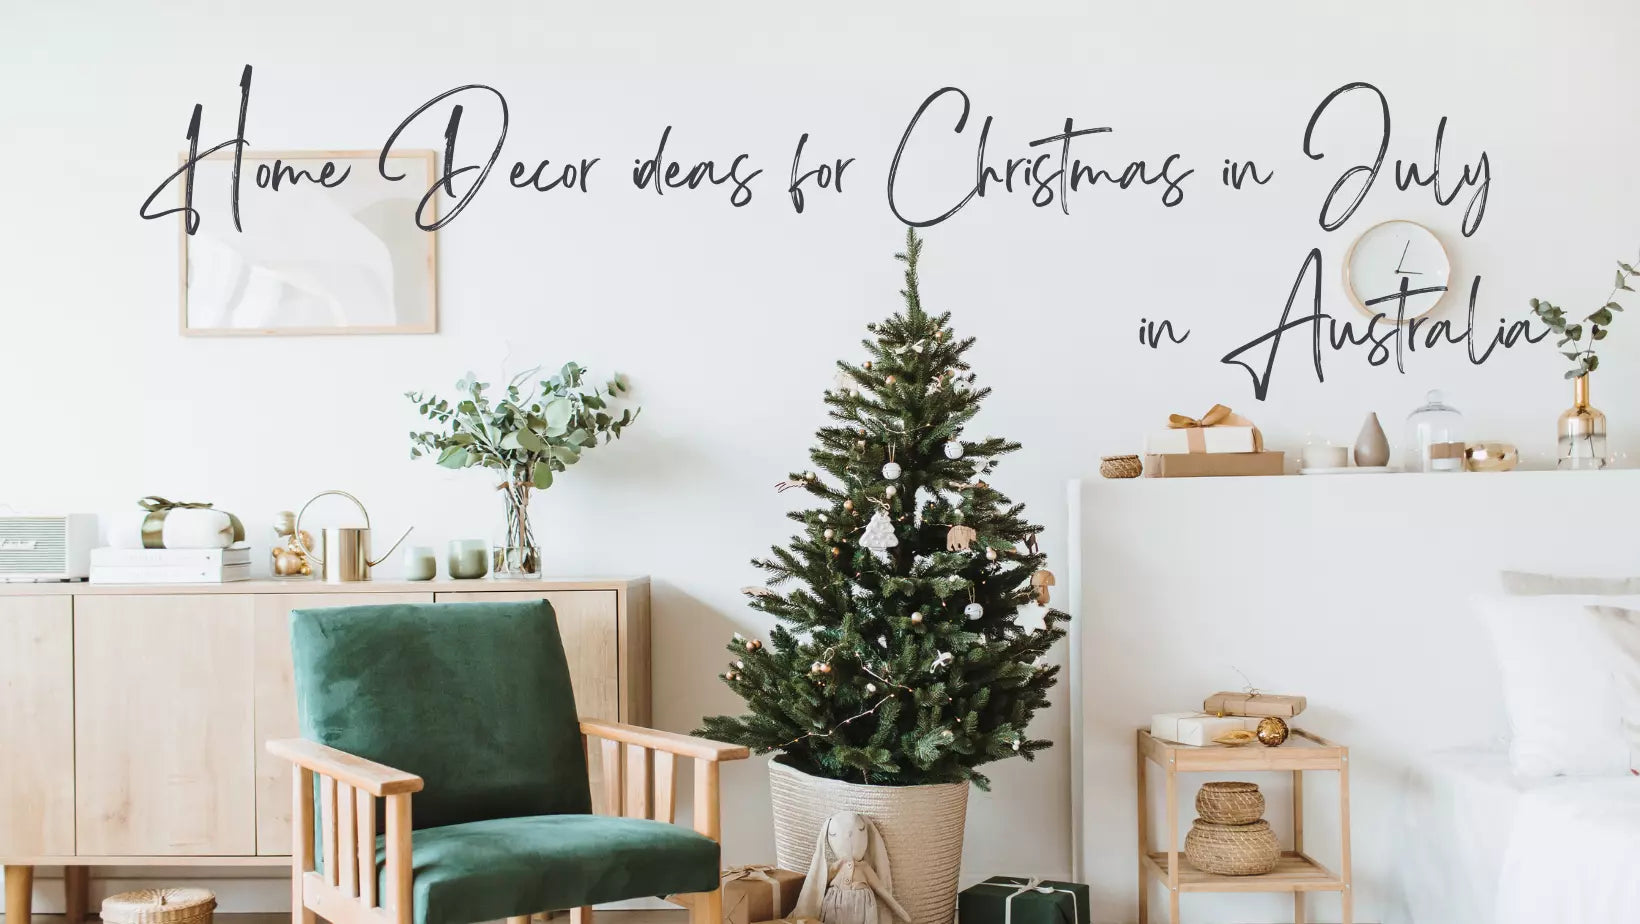 Home Decor ideas for Christmas in July.